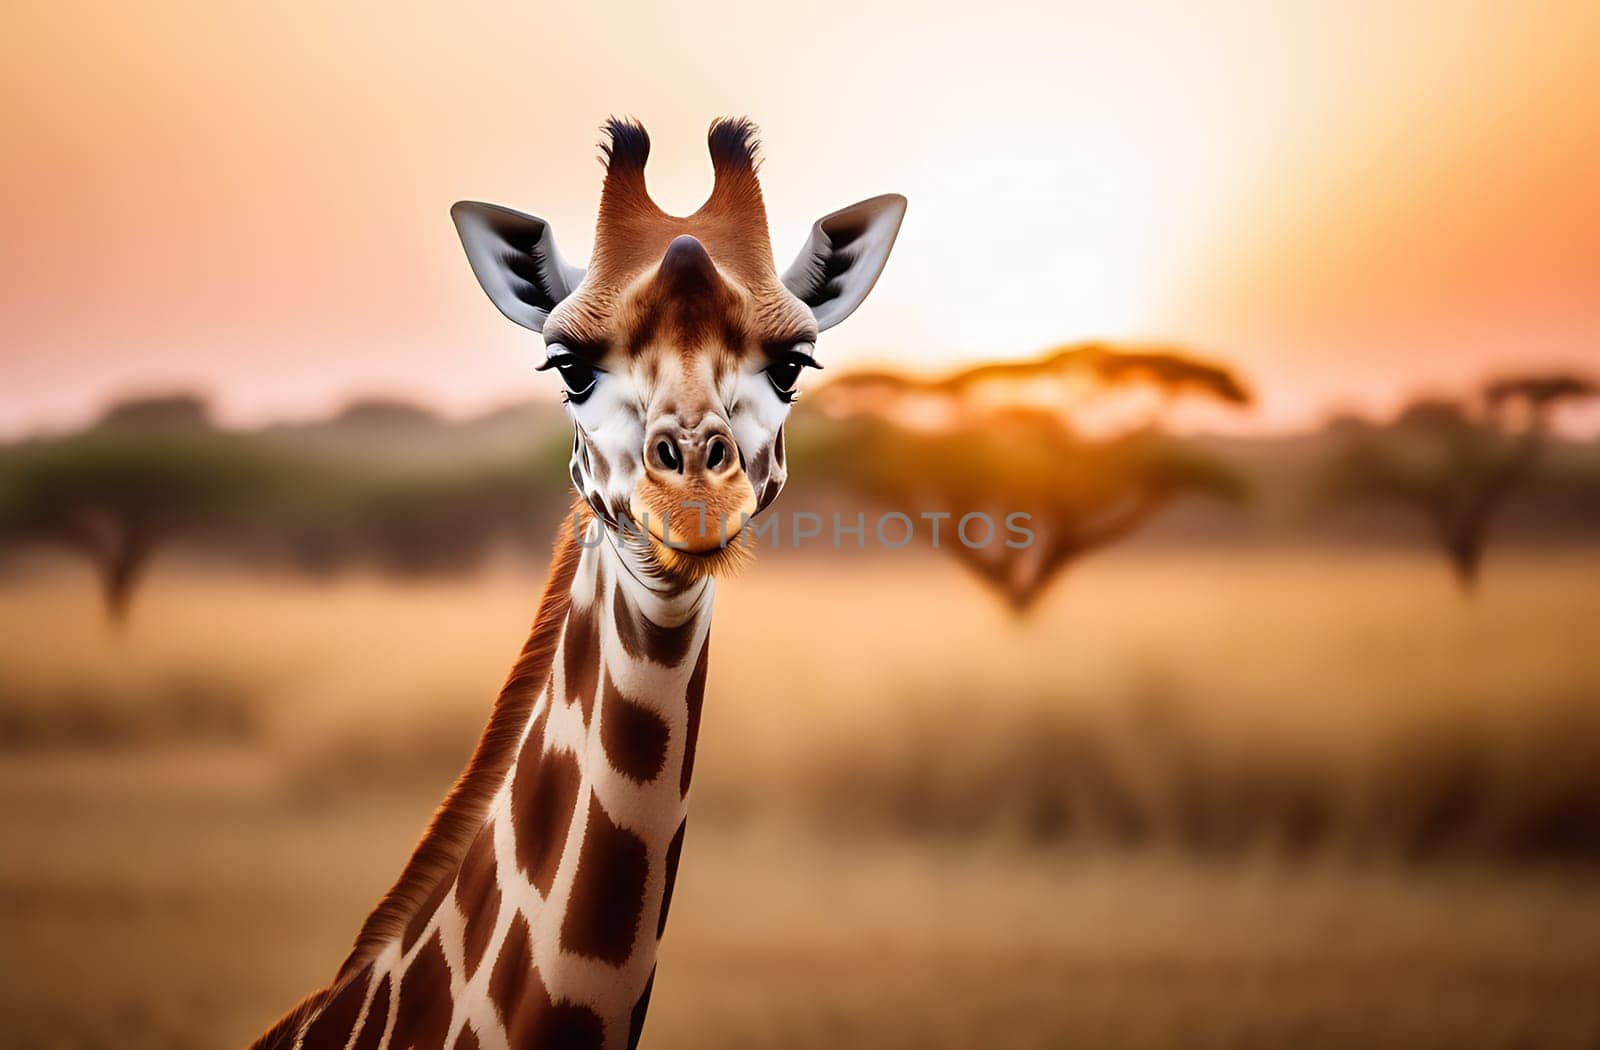 Close-up picture of a giraffe looking at camera and smiles against the backdrop of the savannah at sunset. by Smile19